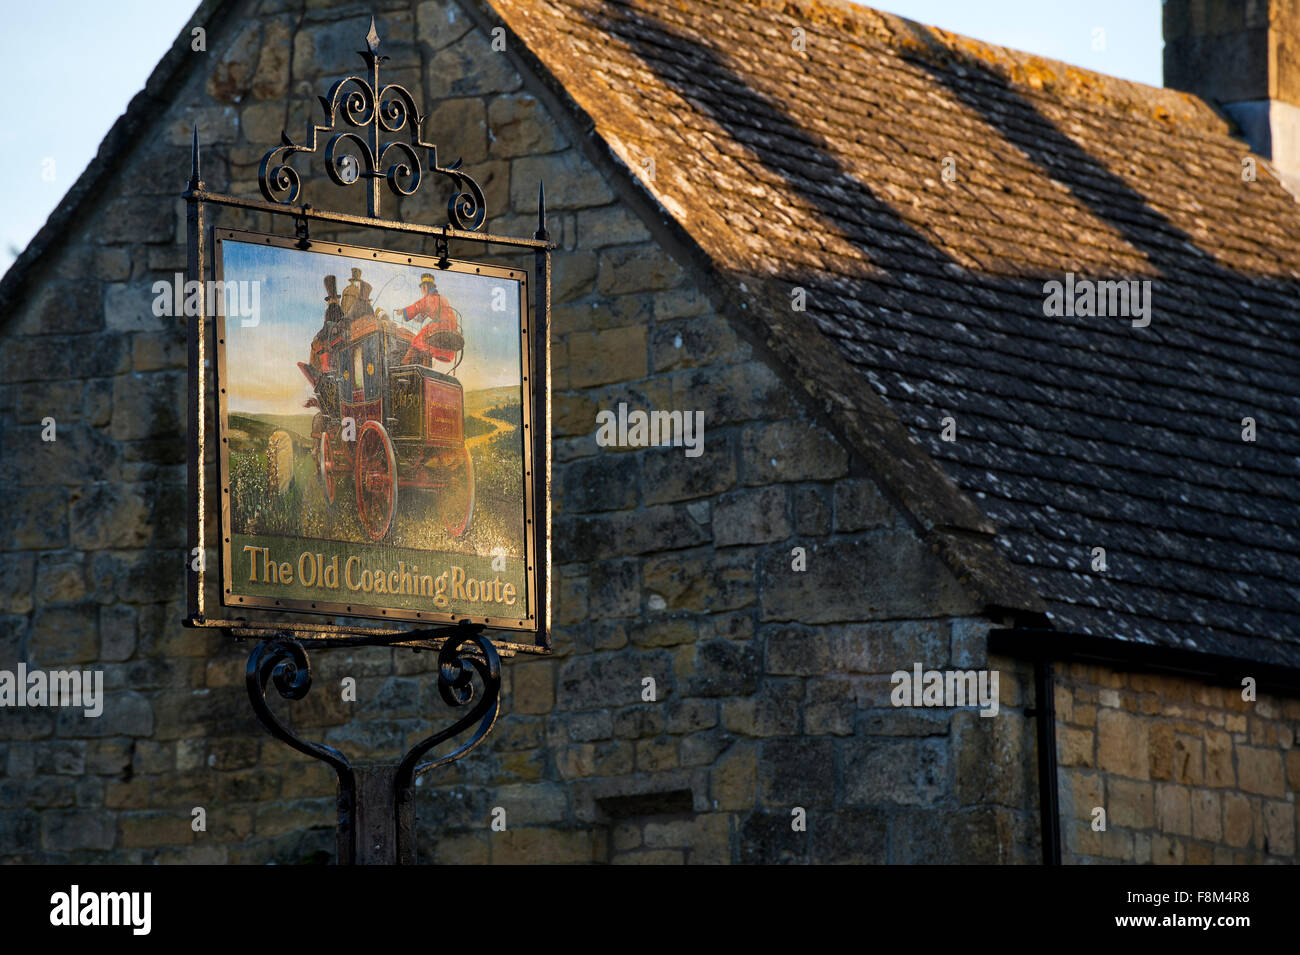 Das alte coaching Route Zeichen Broadway, Cotswolds, Worcestershire, England Stockfoto